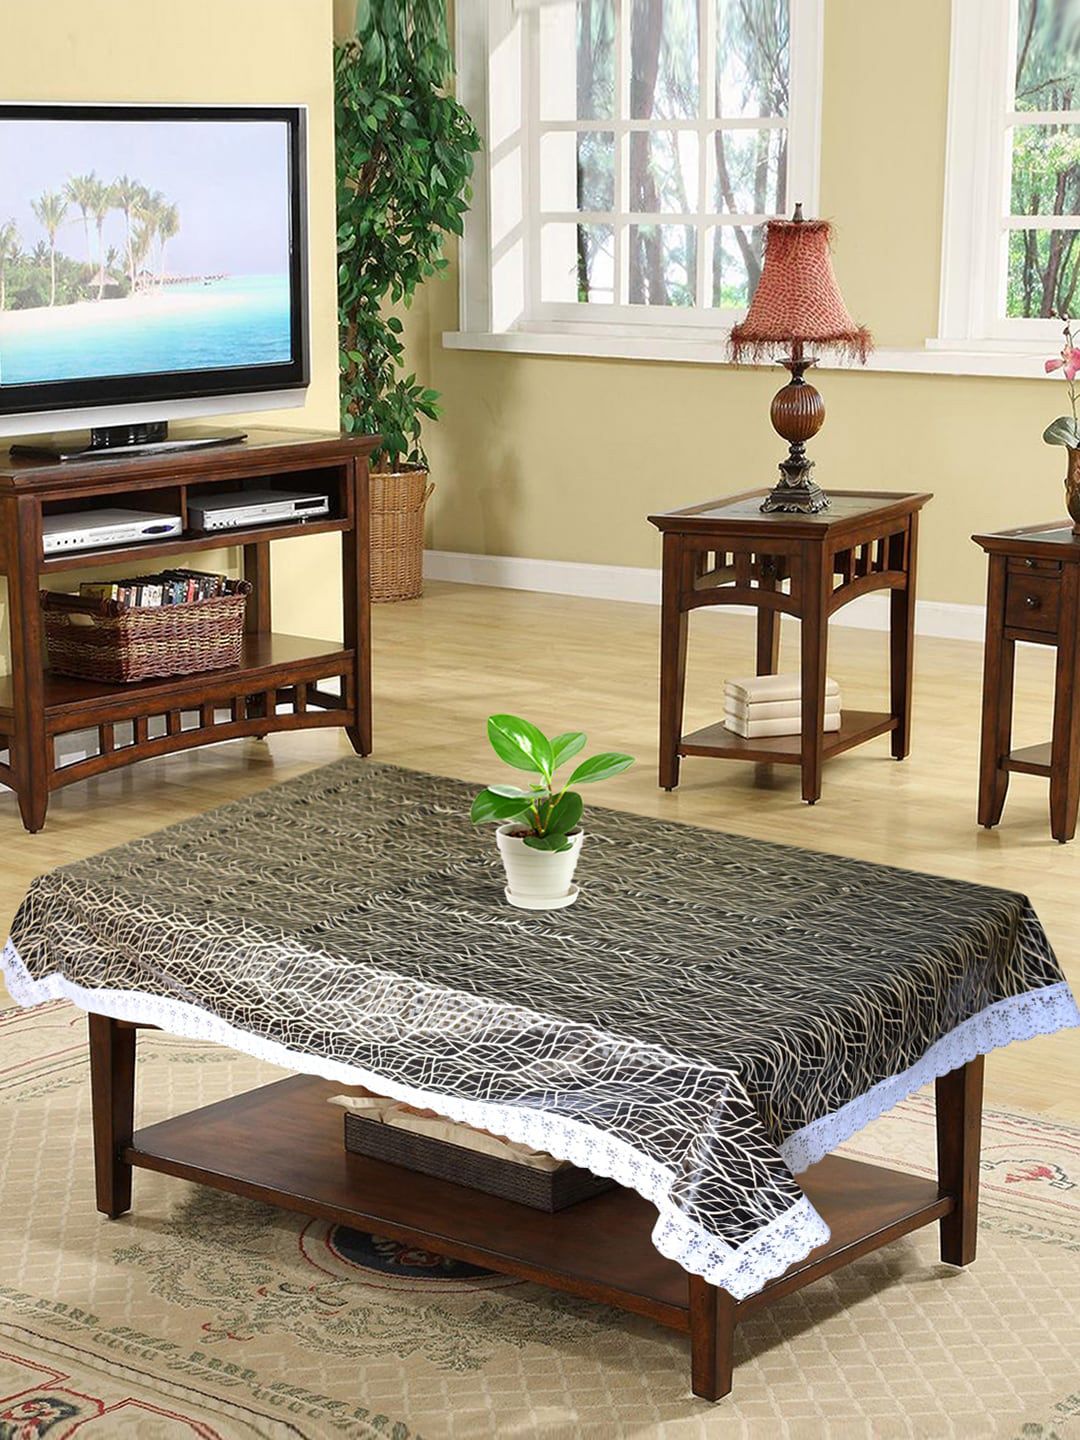 Kuber Industries Black Printed 4 Seater Table Cover Price in India